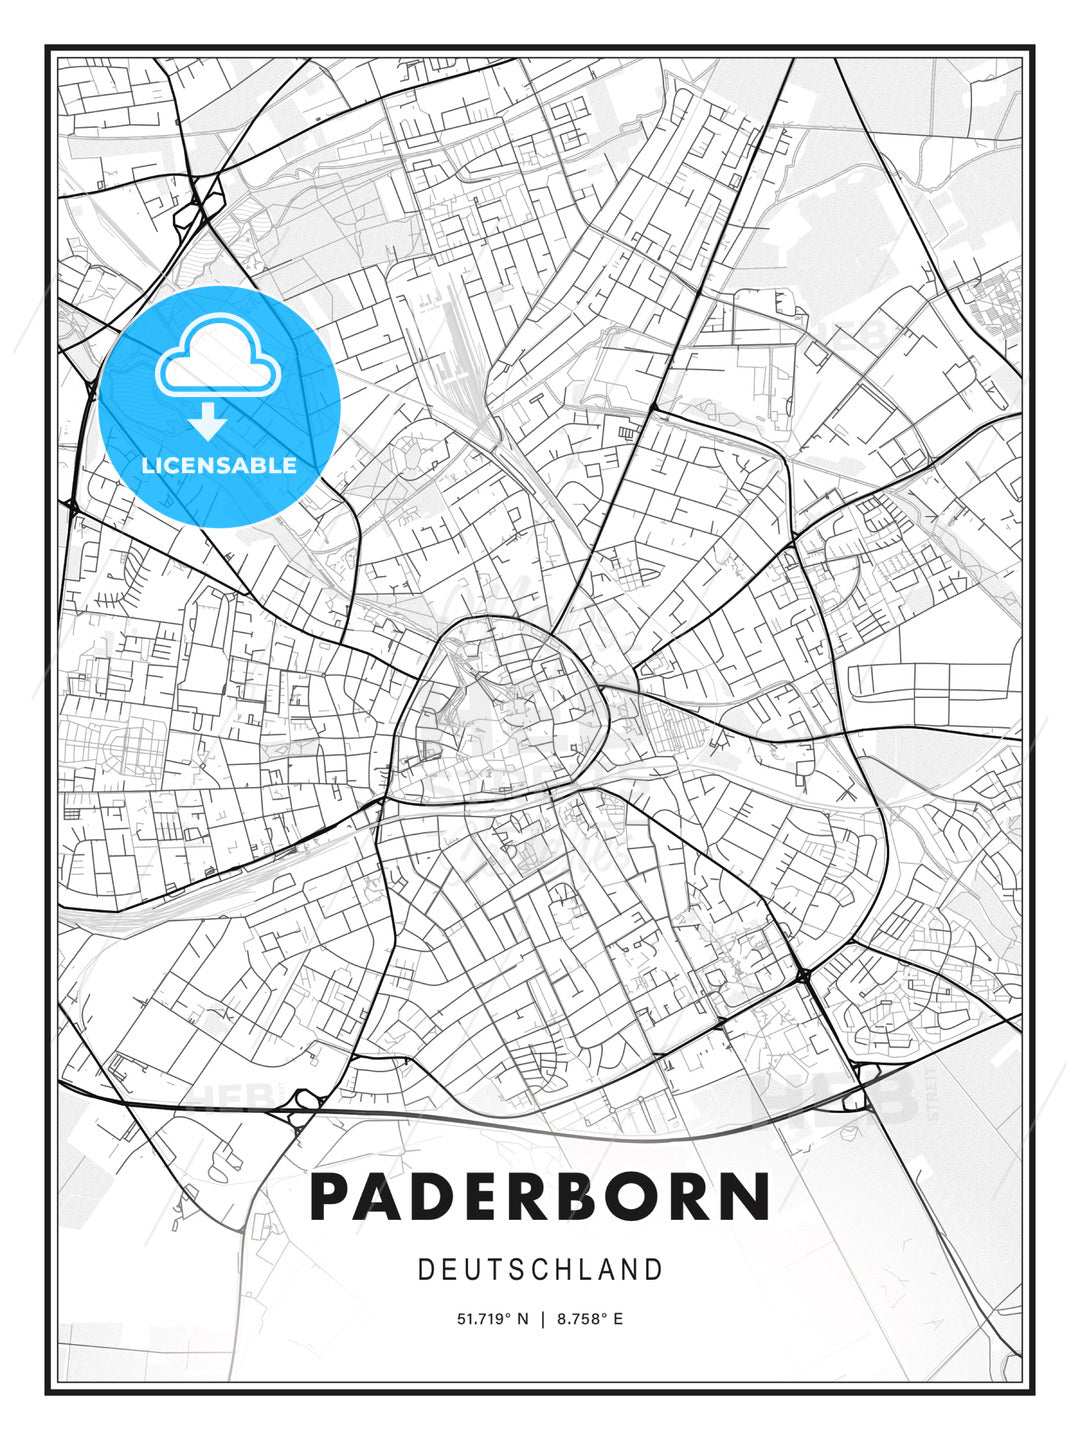 Paderborn, Germany, Modern Print Template in Various Formats - HEBSTREITS Sketches